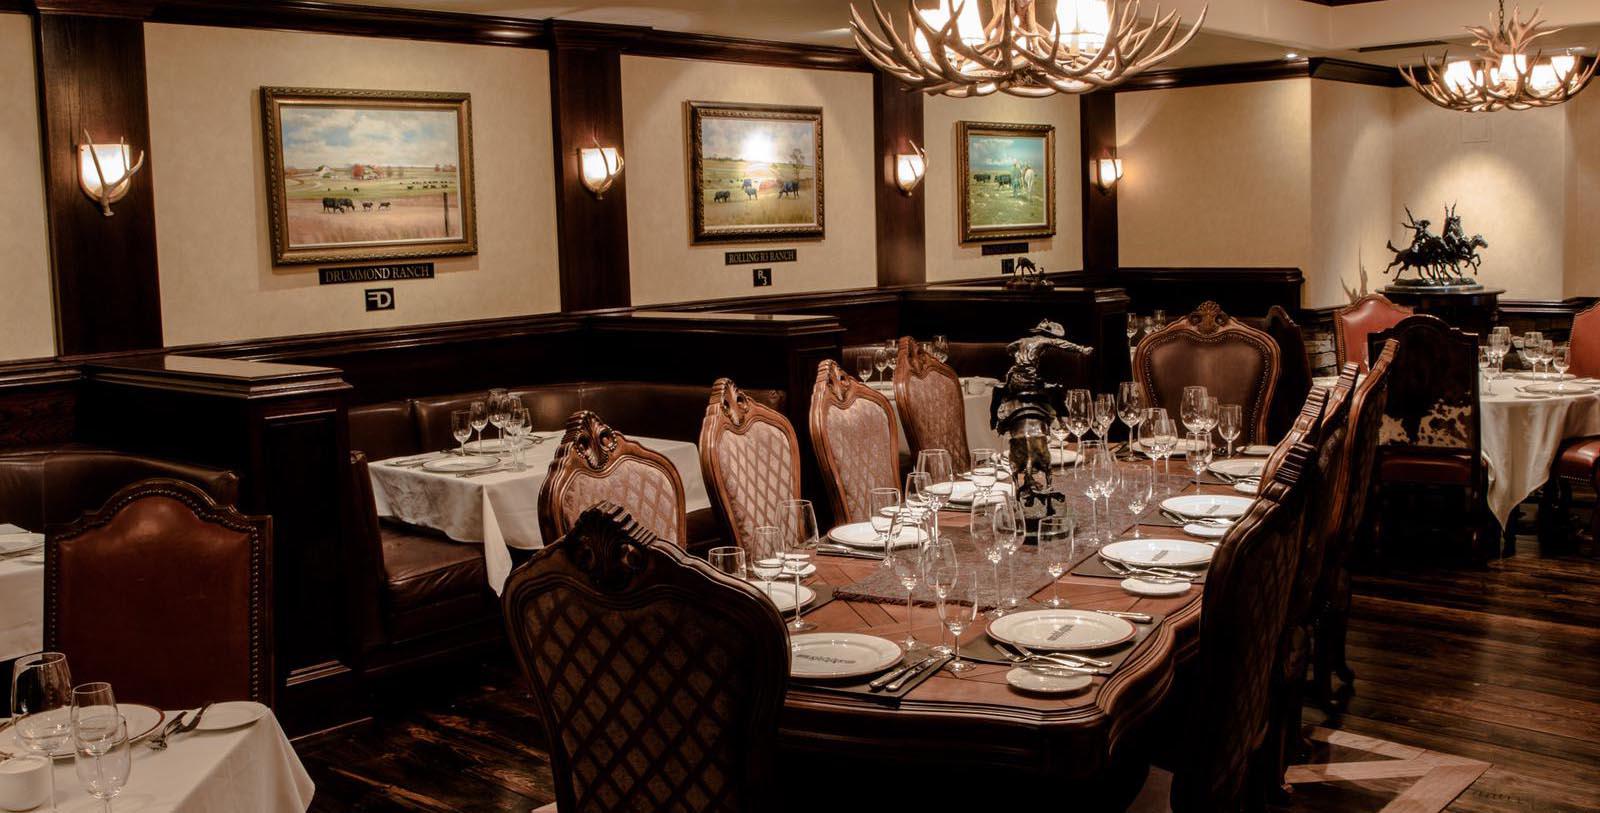 Taste some classic Oklahoma-style cuisine at the Ranchers Club.